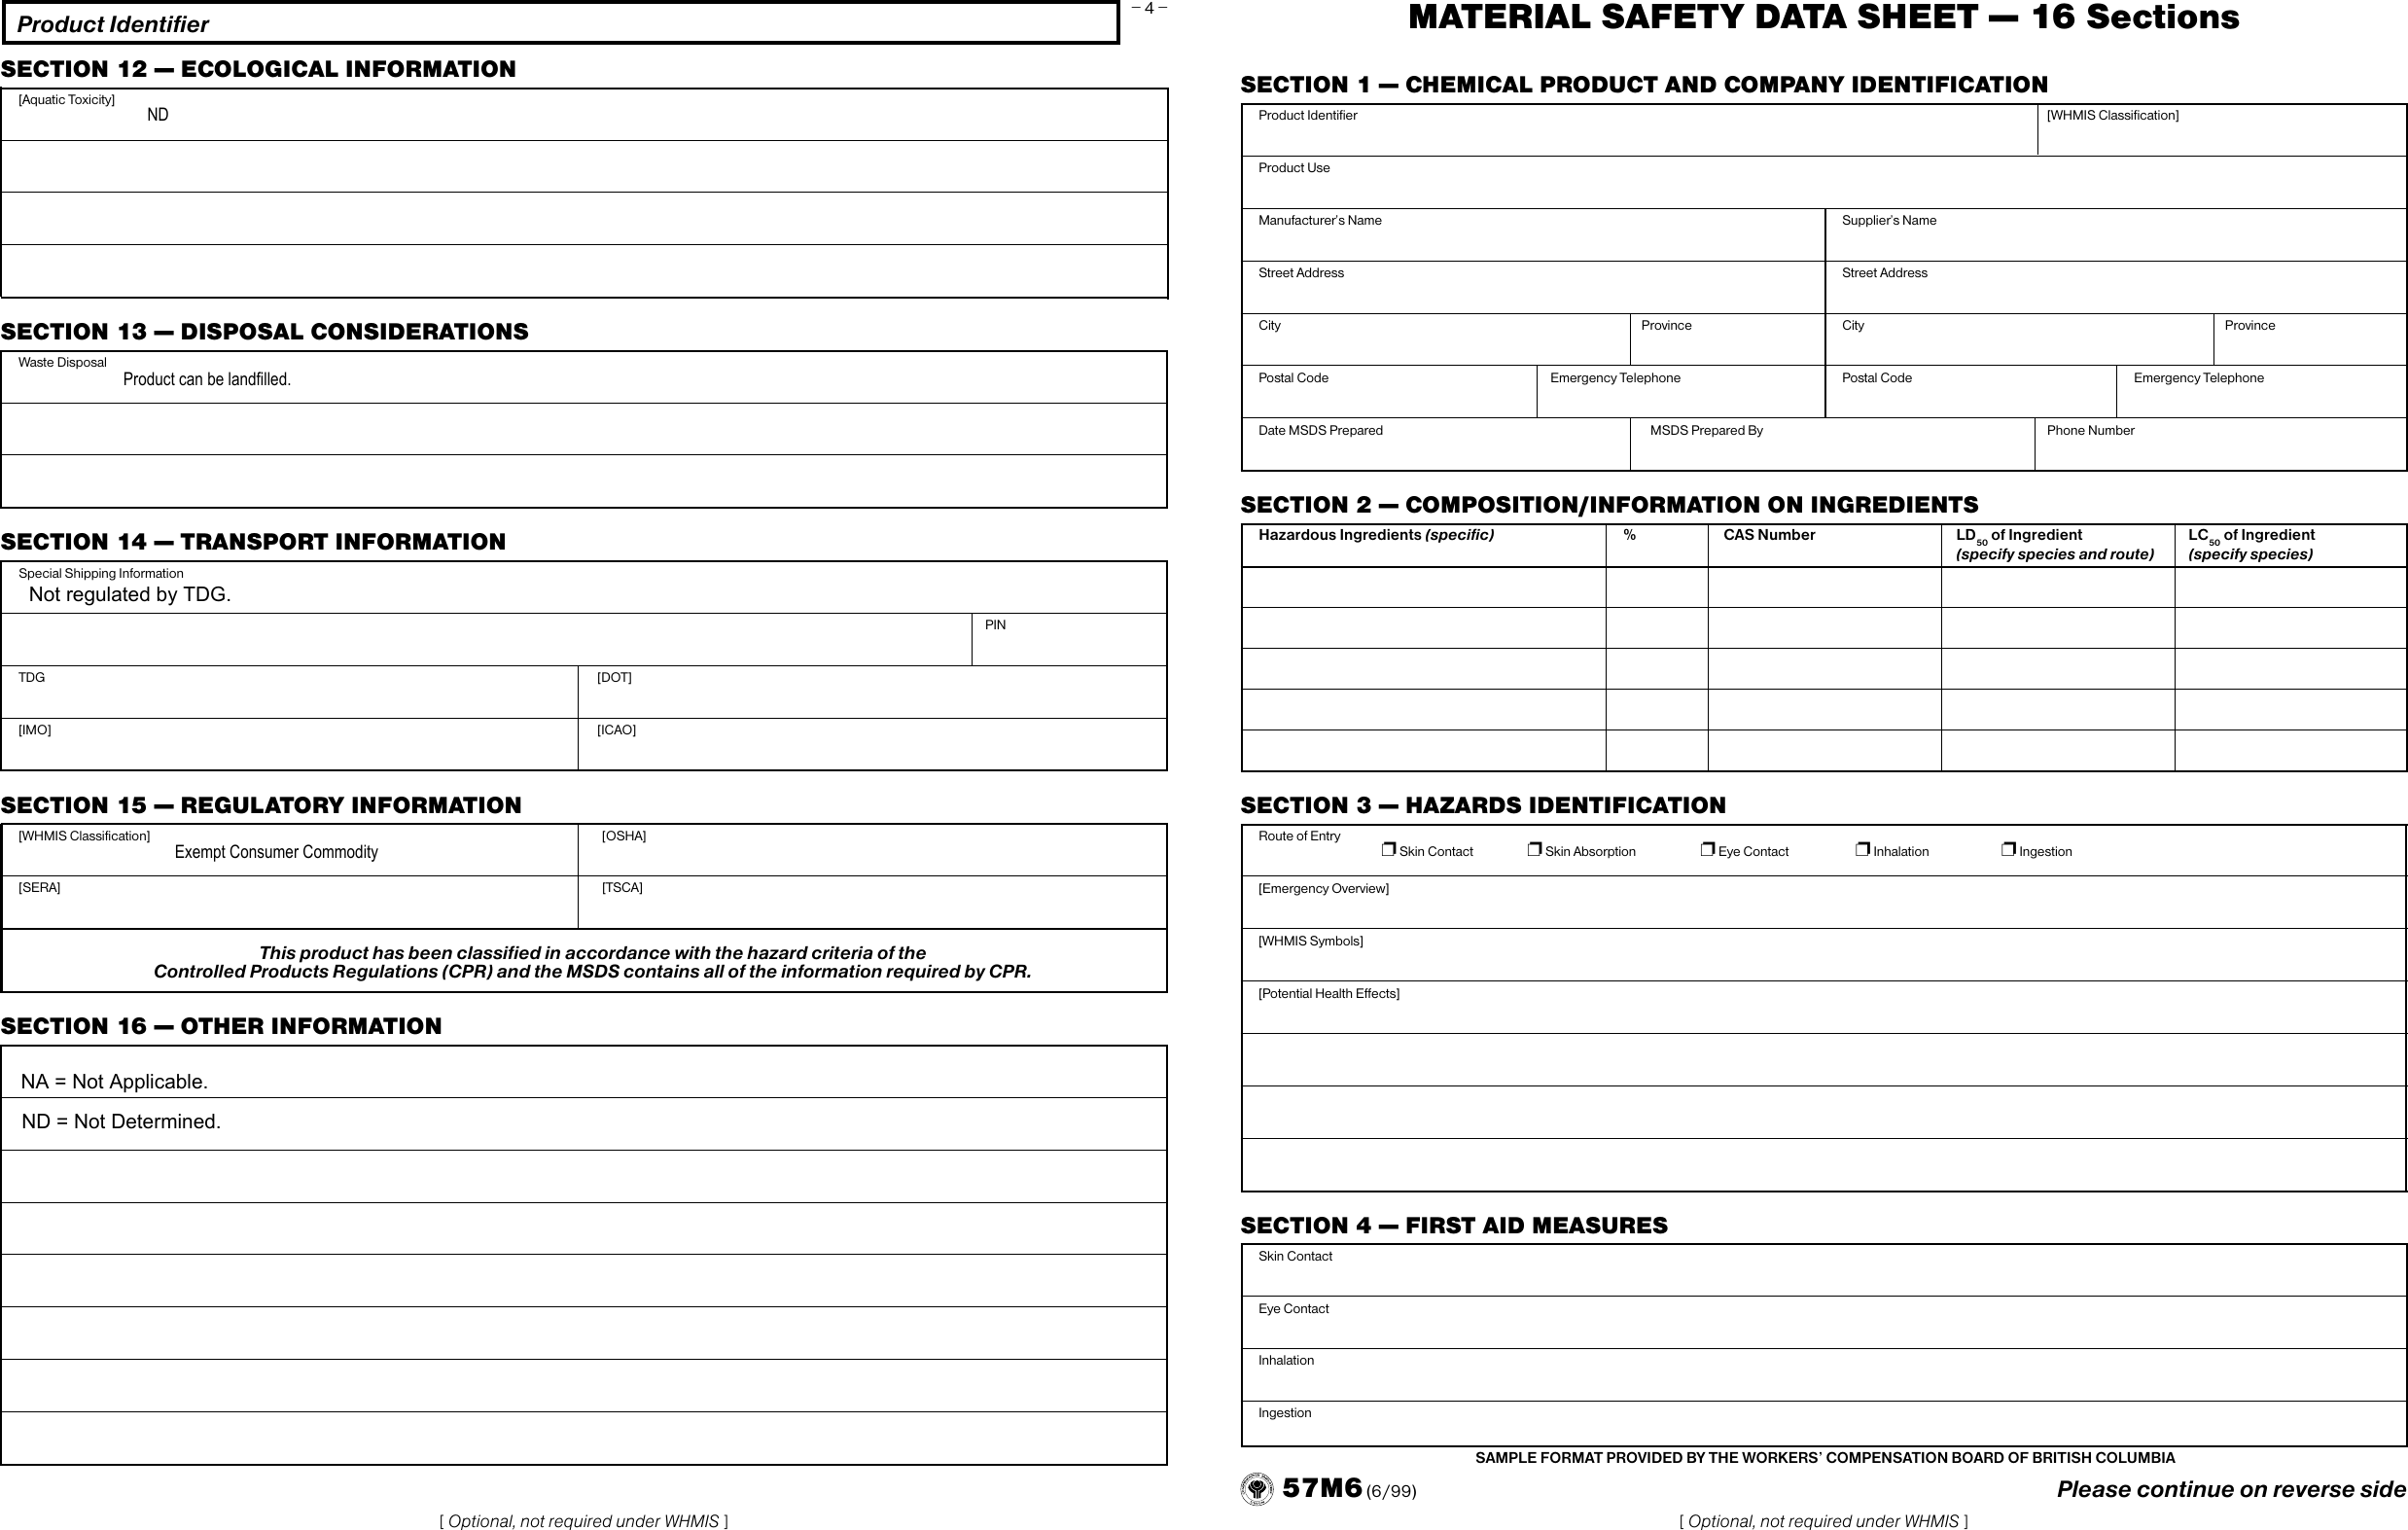 Page 4 of 4 - Material Safety Data Sheet -- 16 Sections  717376 MSDS